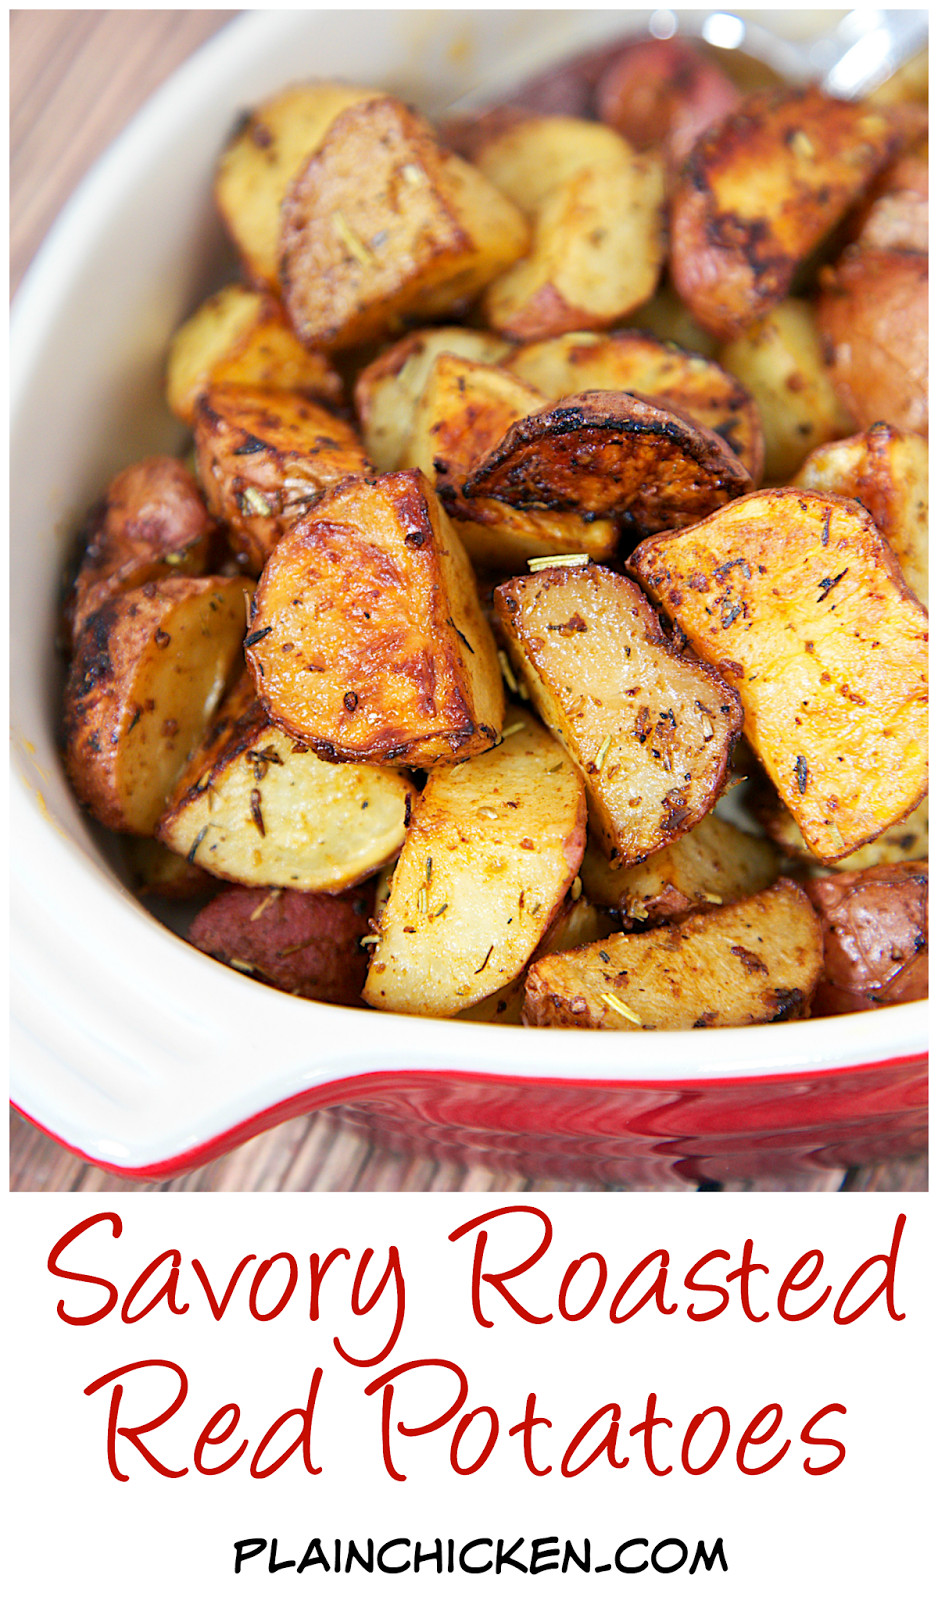 Red Roasted Potatoes
 Savory Roasted Red Potatoes